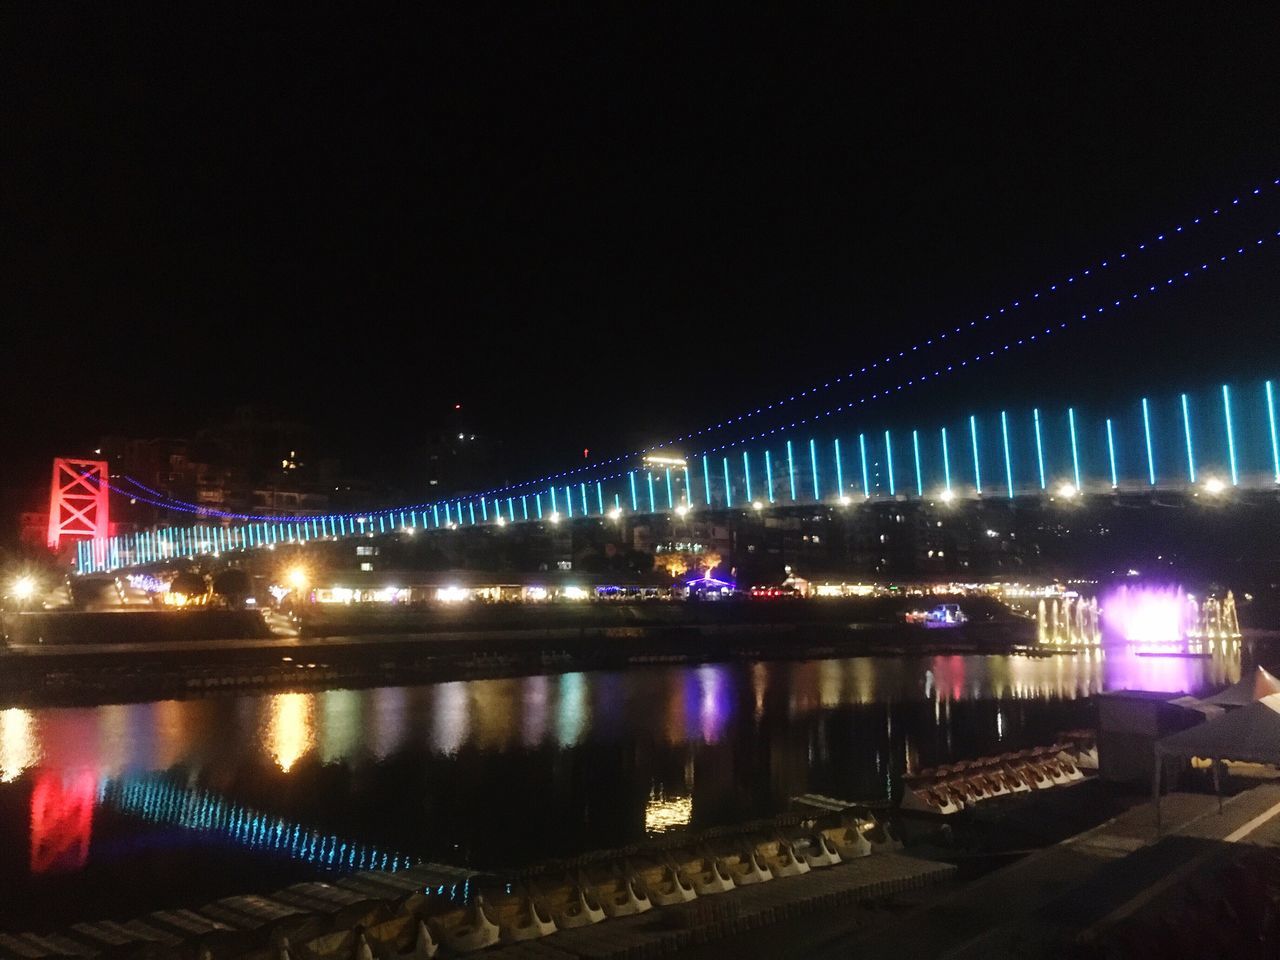 illuminated, night, reflection, water, bridge - man made structure, transportation, river, architecture, sky, built structure, travel destinations, city, building exterior, no people, connection, outdoors, nautical vessel